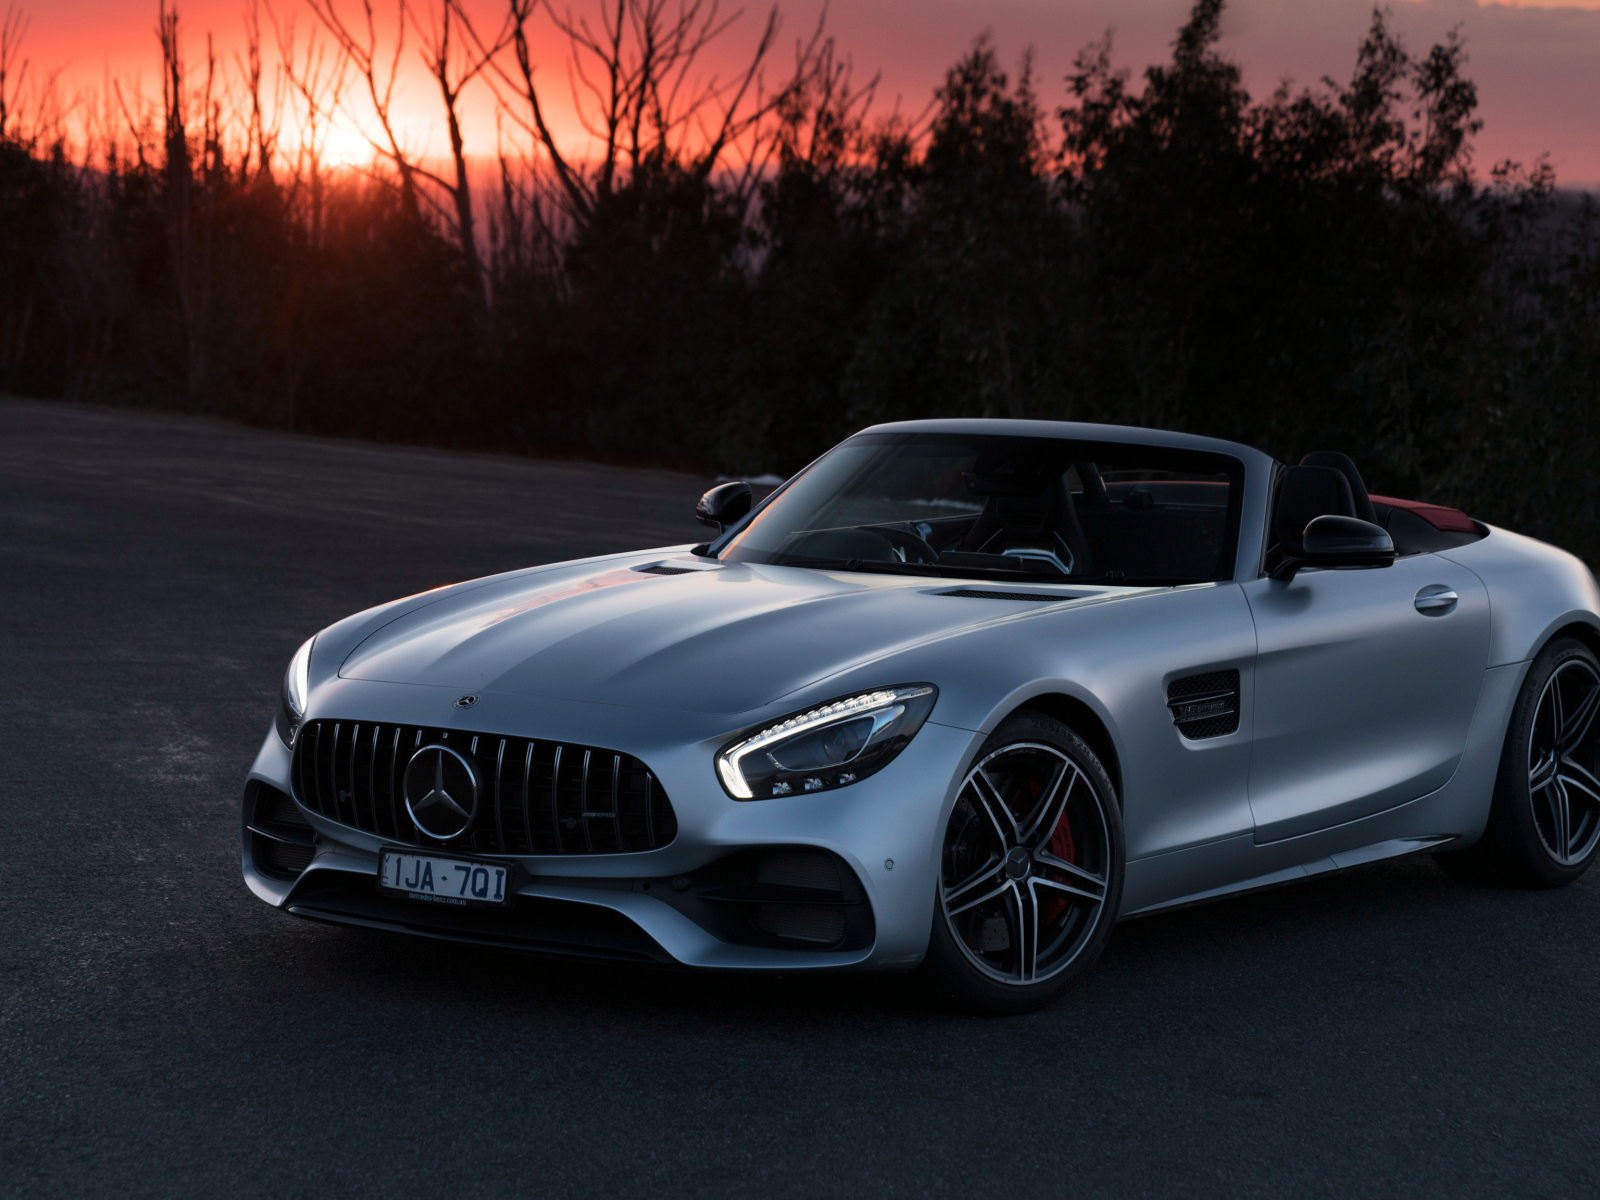 Silver Convertible Mercedes-AMG GT C Roadster, 2018 at sunset